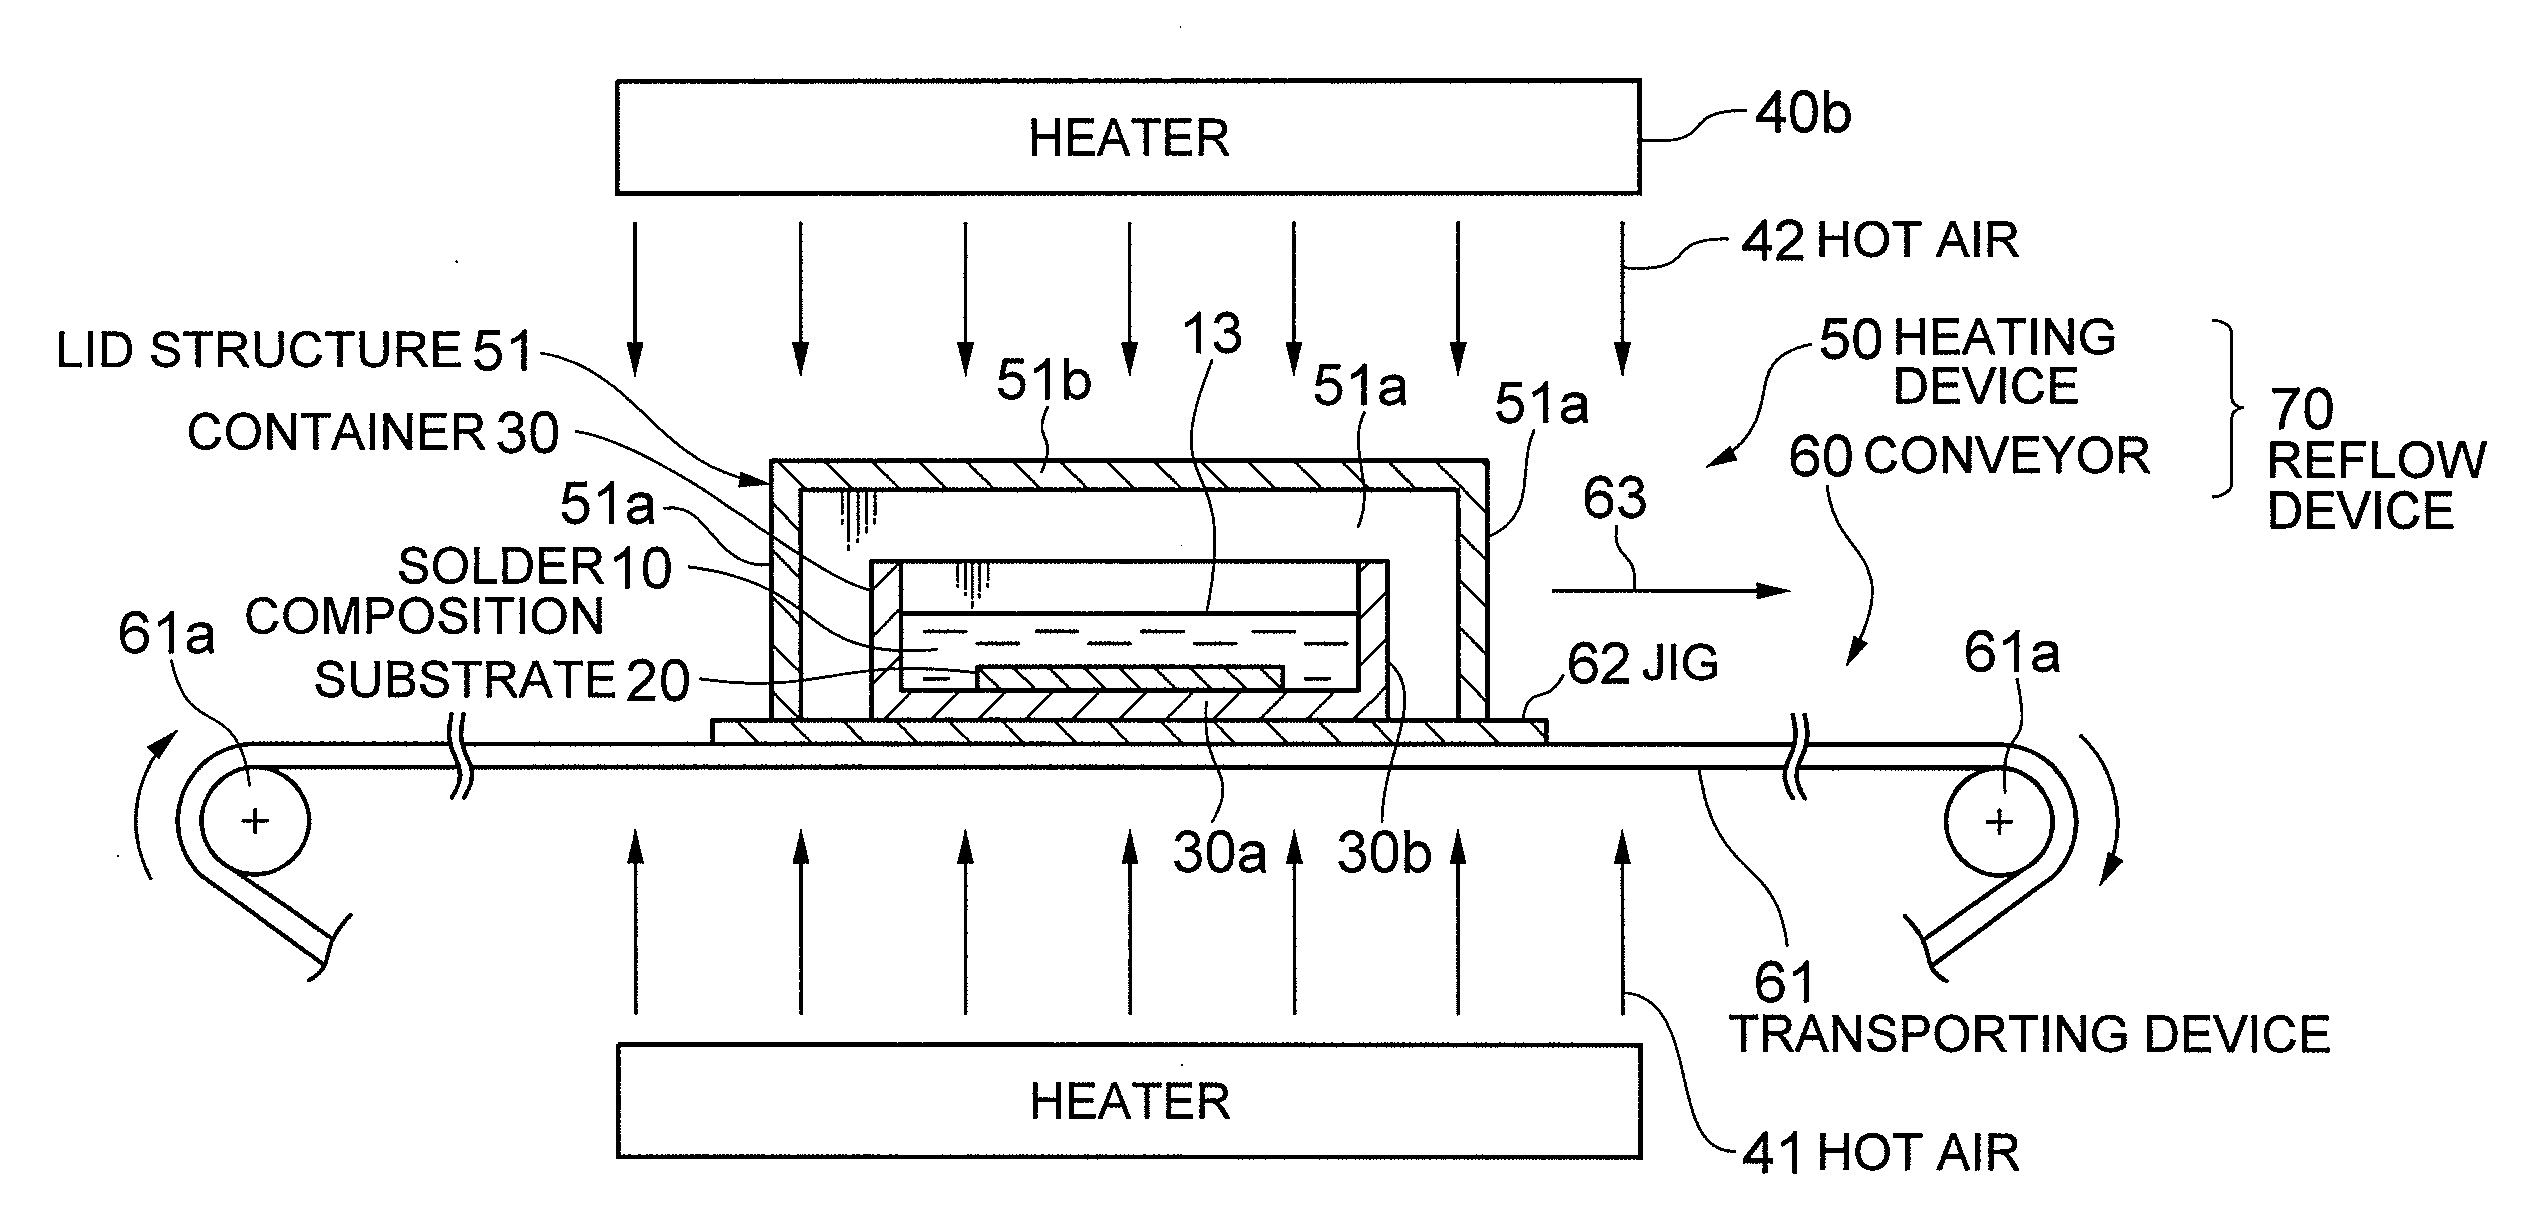 Heating device, reflow device, heating method, and bump forming method